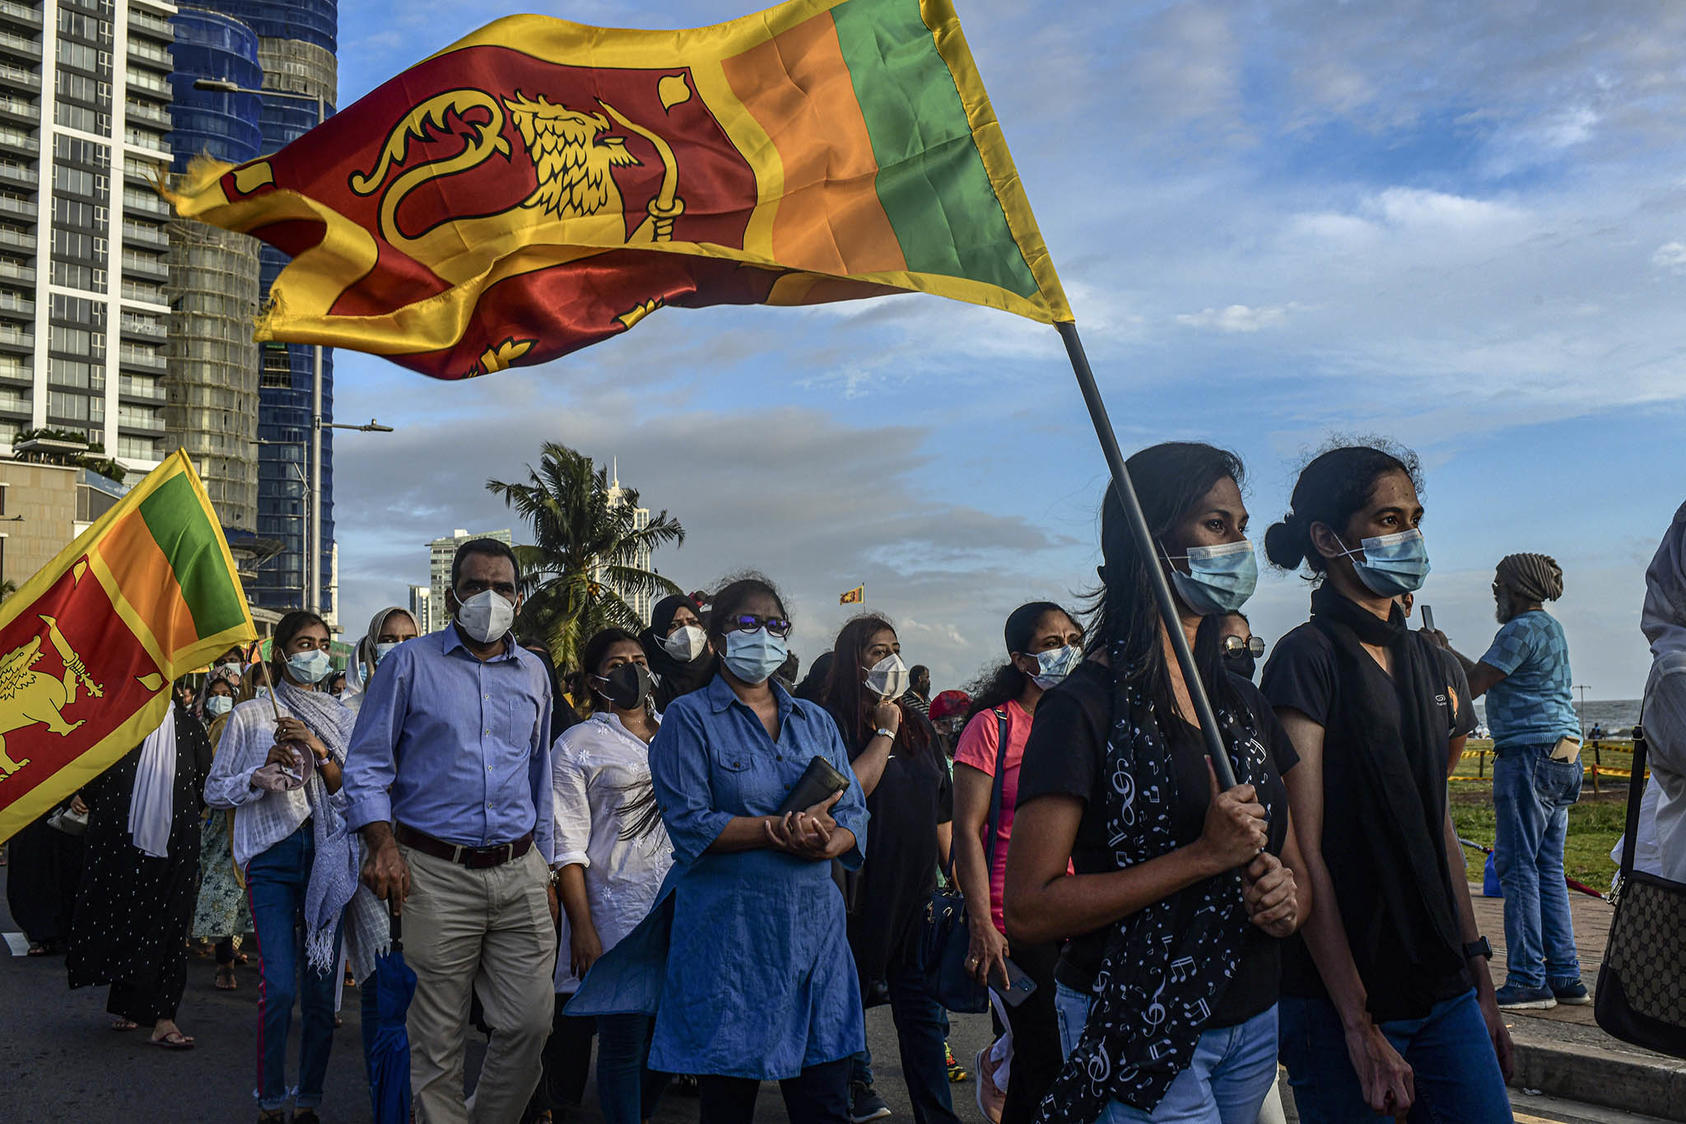 Protesters carrying the Sri Lanka flag march in the Galle Face Green area of Colombo, Sri Lanka, May 17, 2022. (Atul Loke/The New York Times)